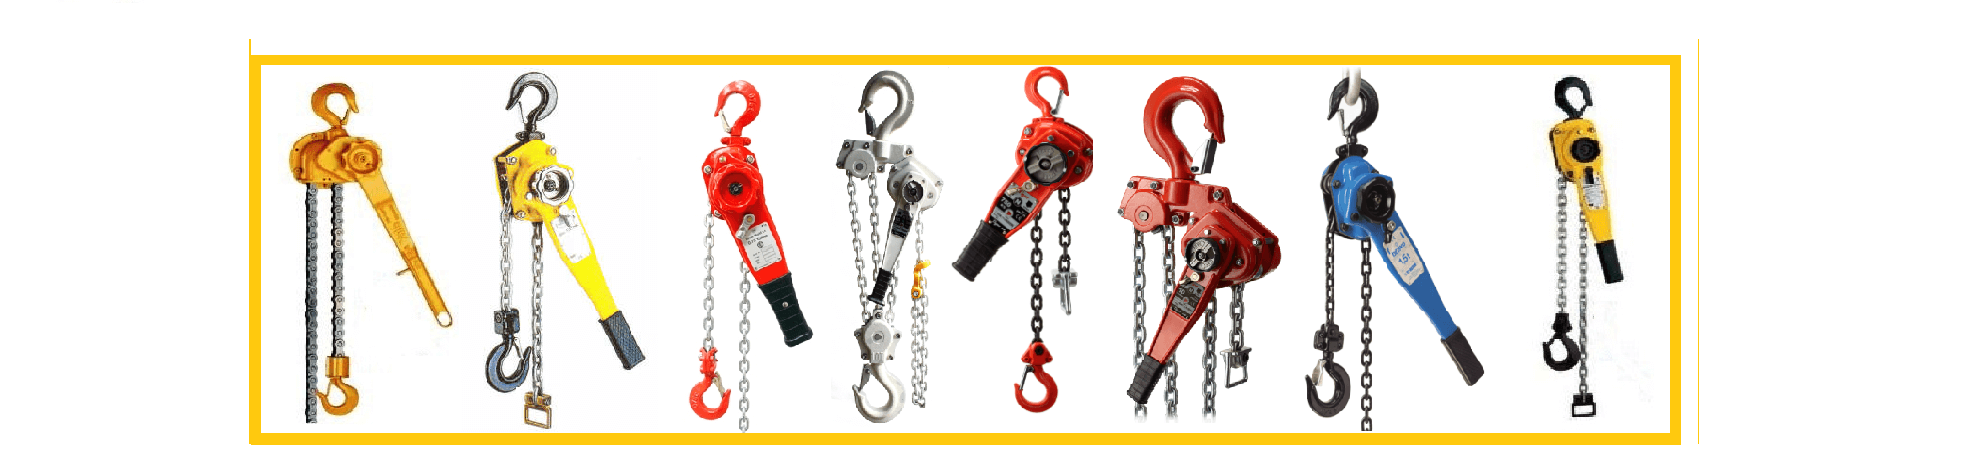 lever hoist collection from Lifting Hoists Direct